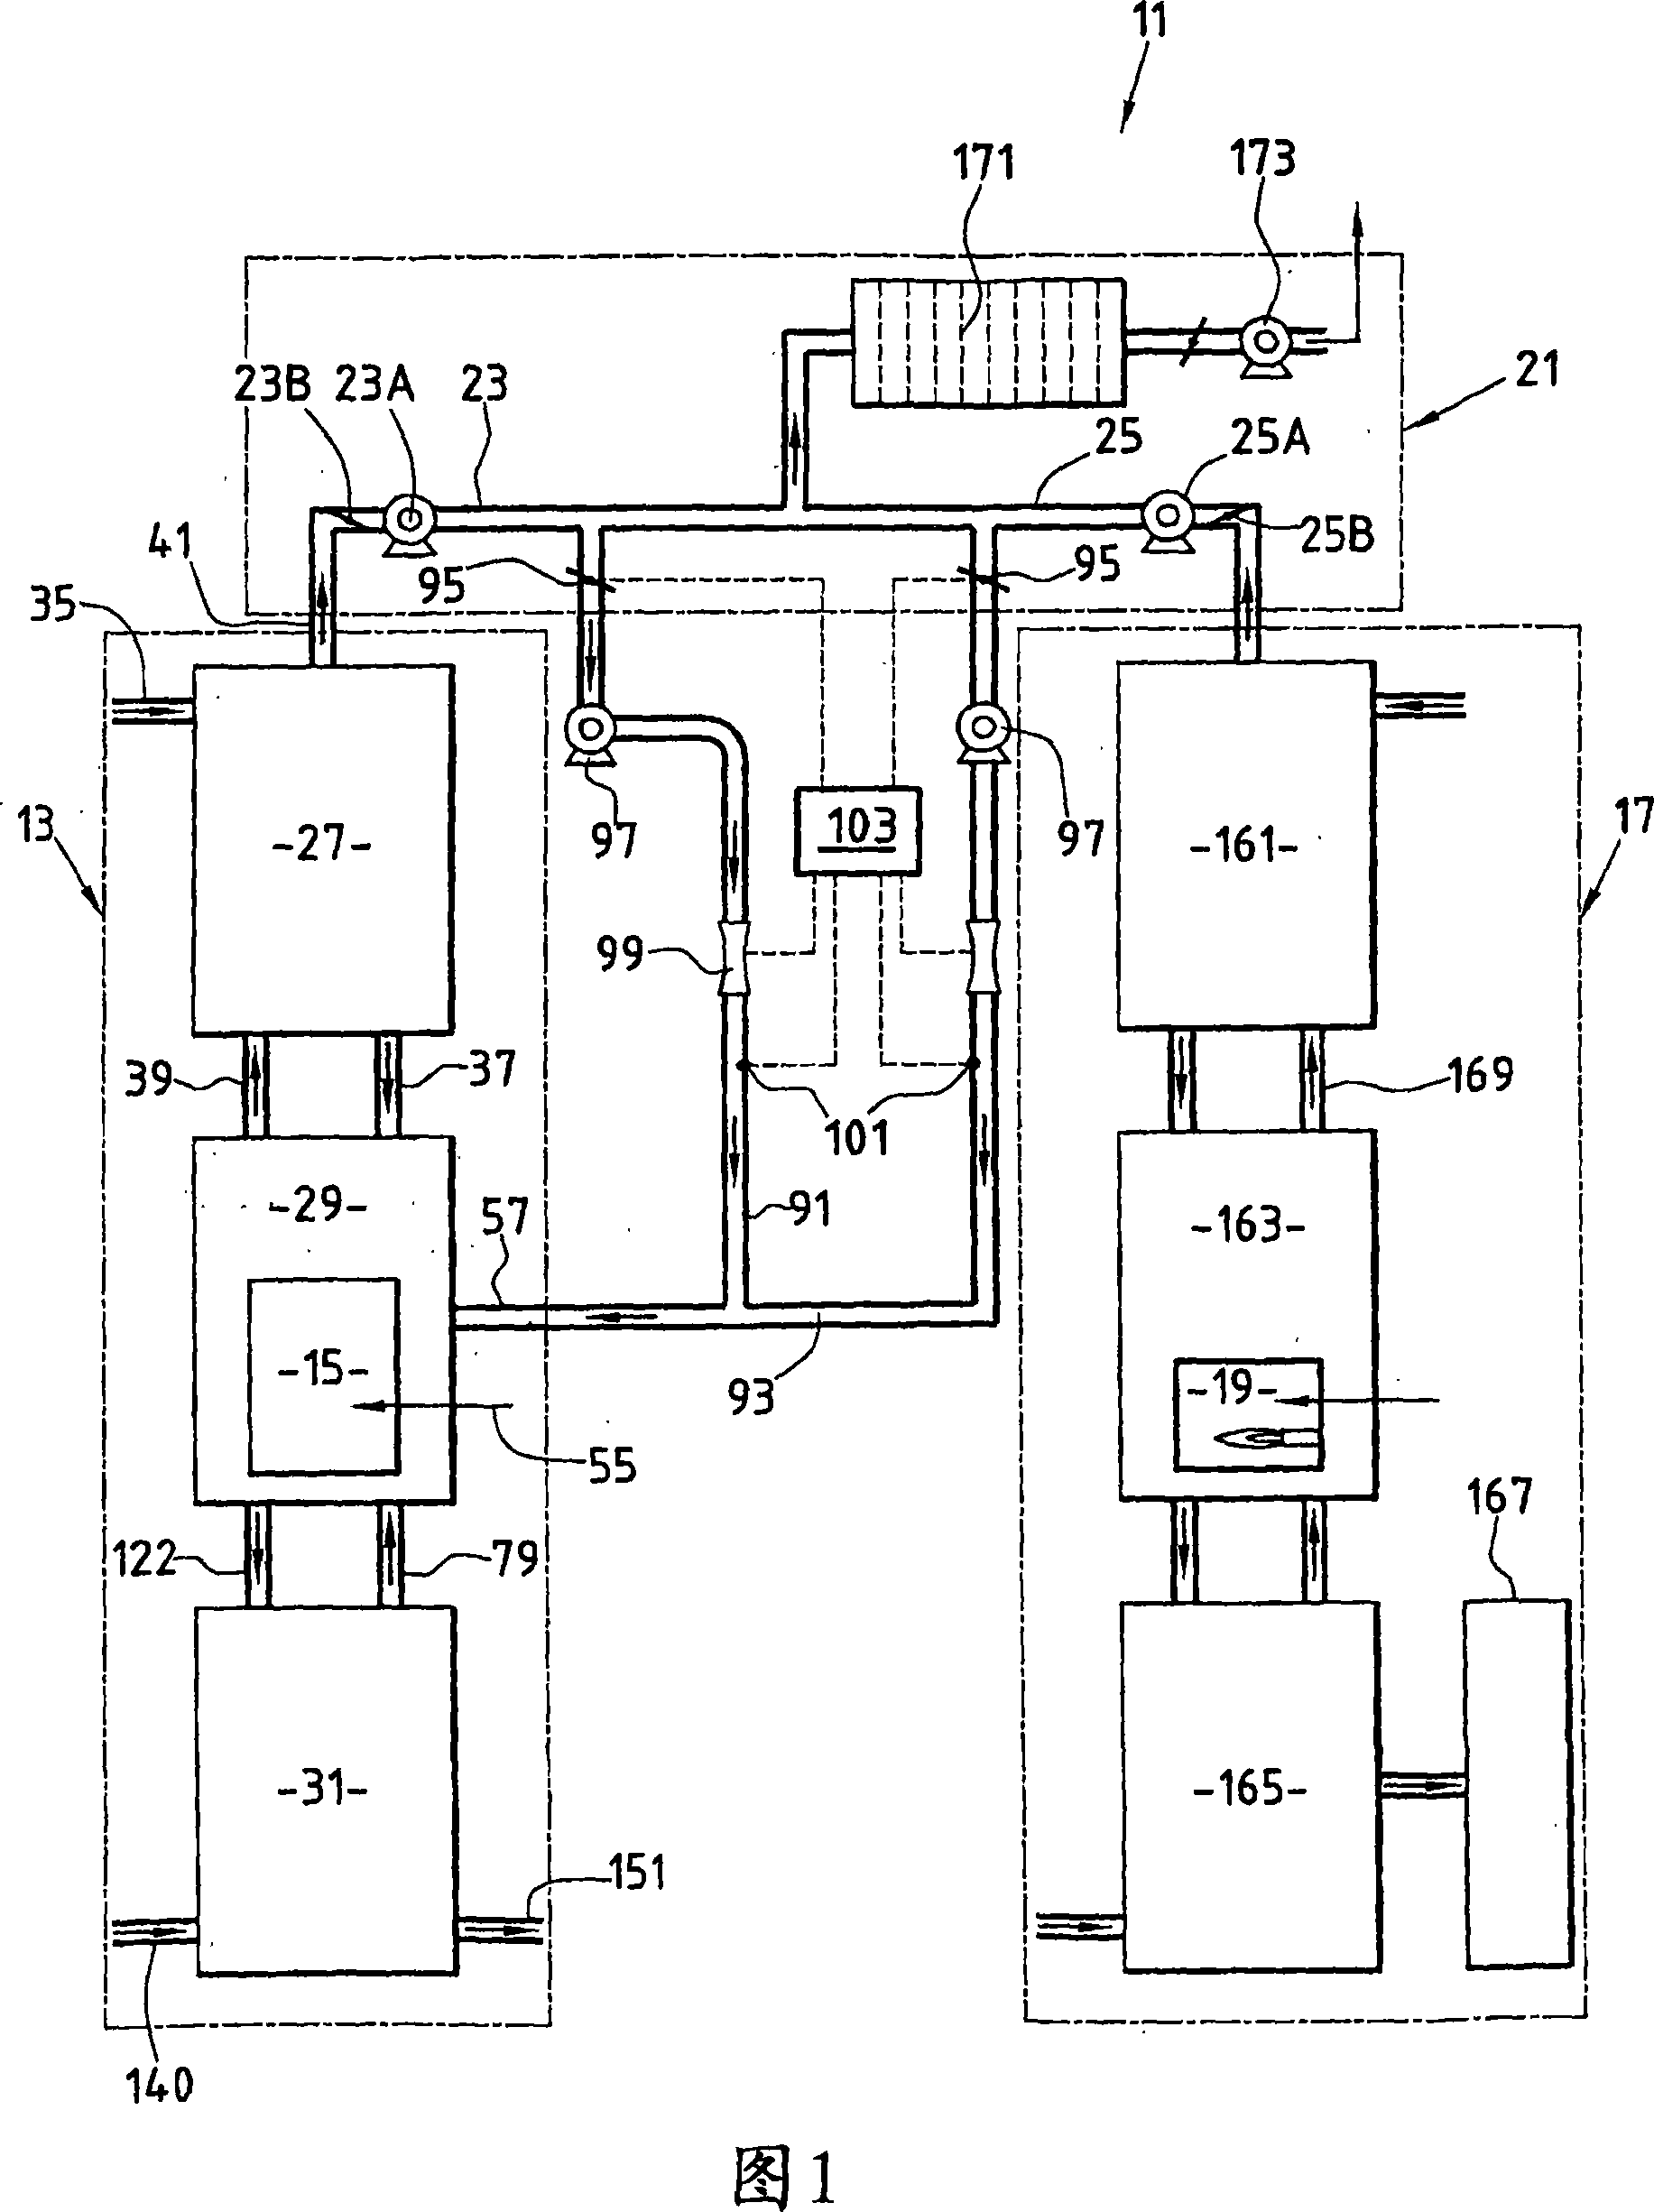 Installation and process for calcining a mineral load containing a carbonate in order to produce a hydraulic binder